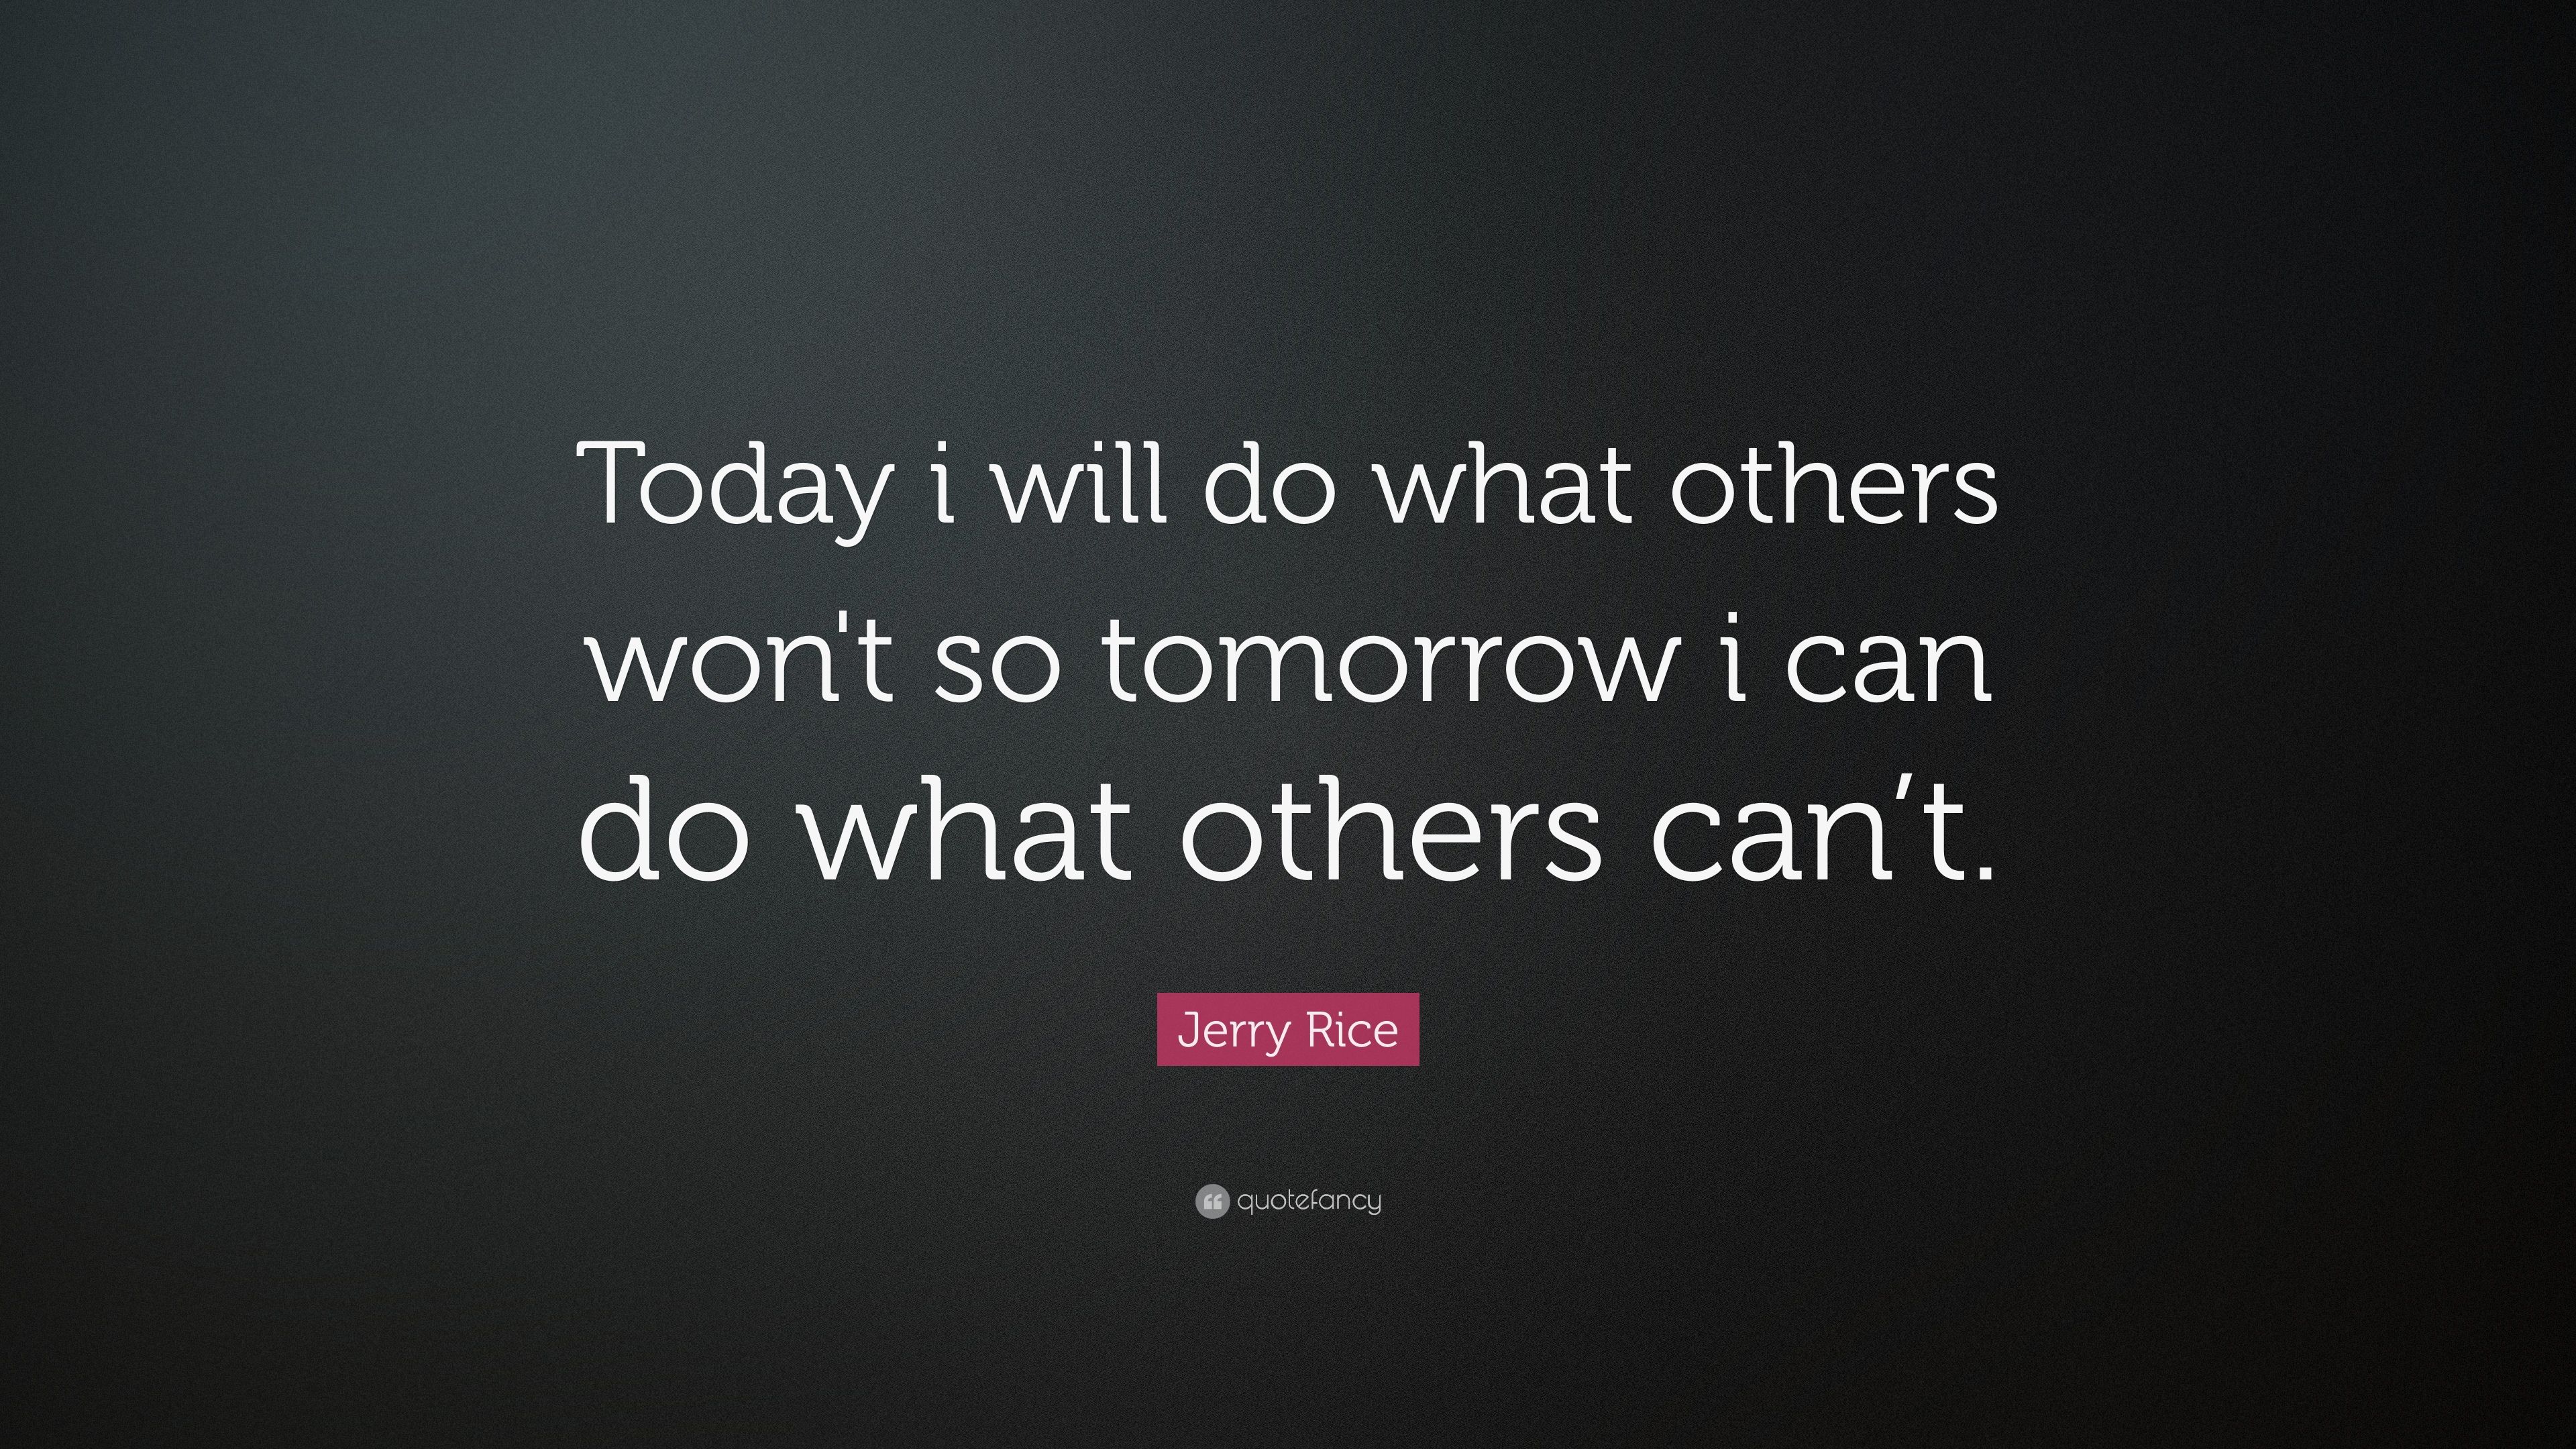 Jerry Rice Quote: “Today i will do what others won't so tomorrow i can do